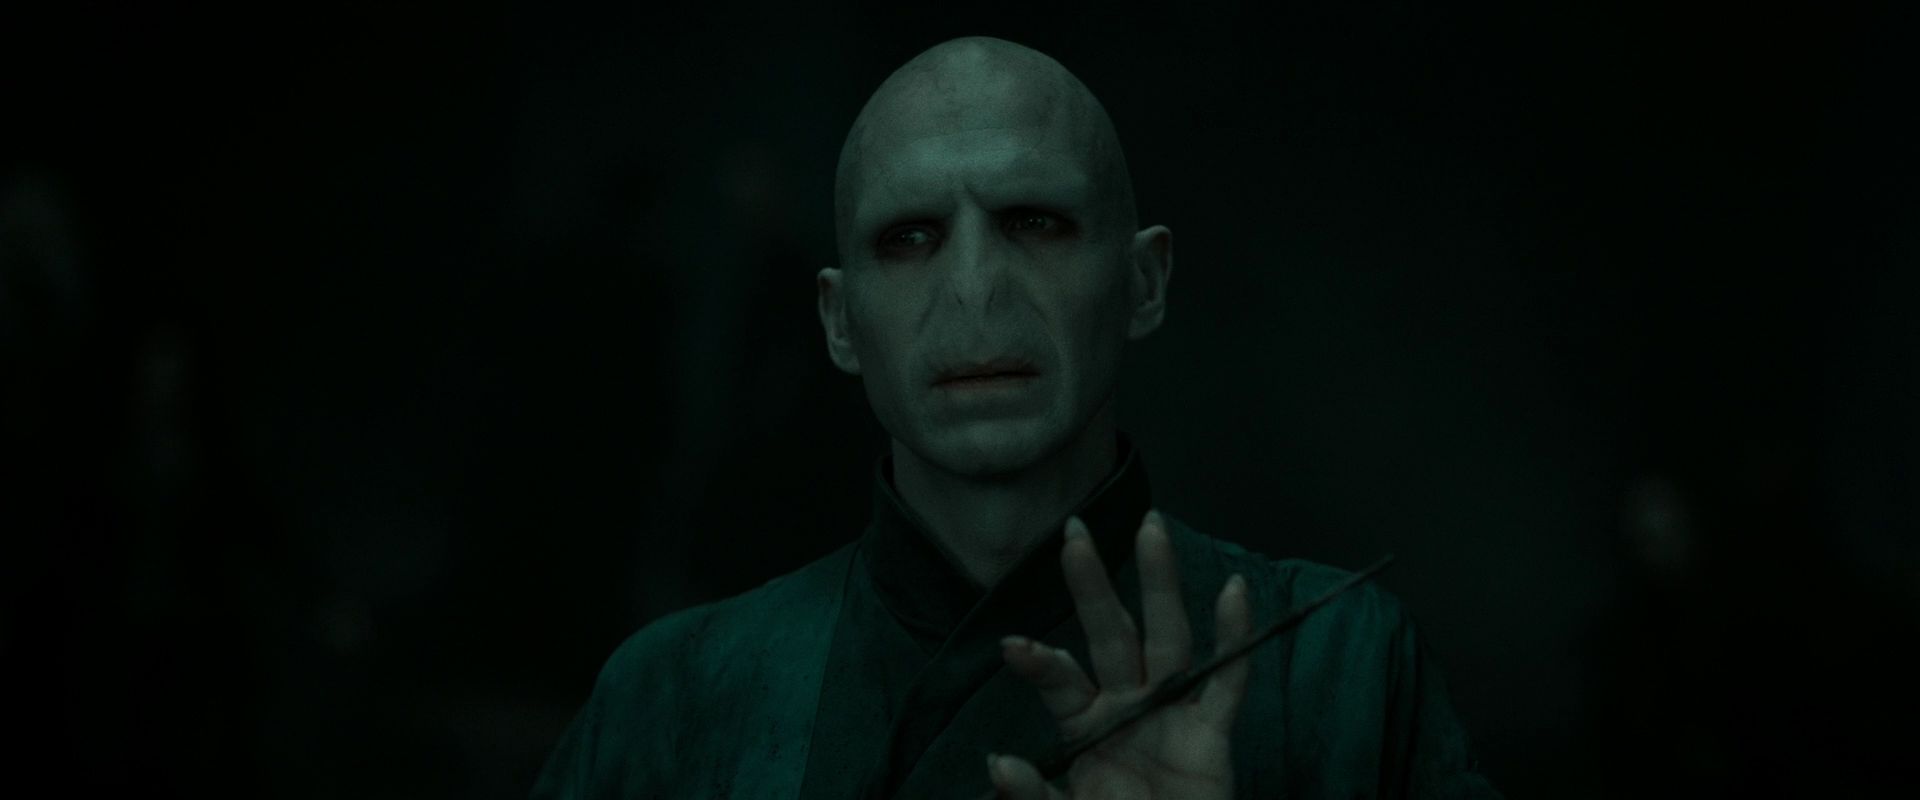 lord voldemort, images, image, wallpaper, photos, photo, photograph, galler...